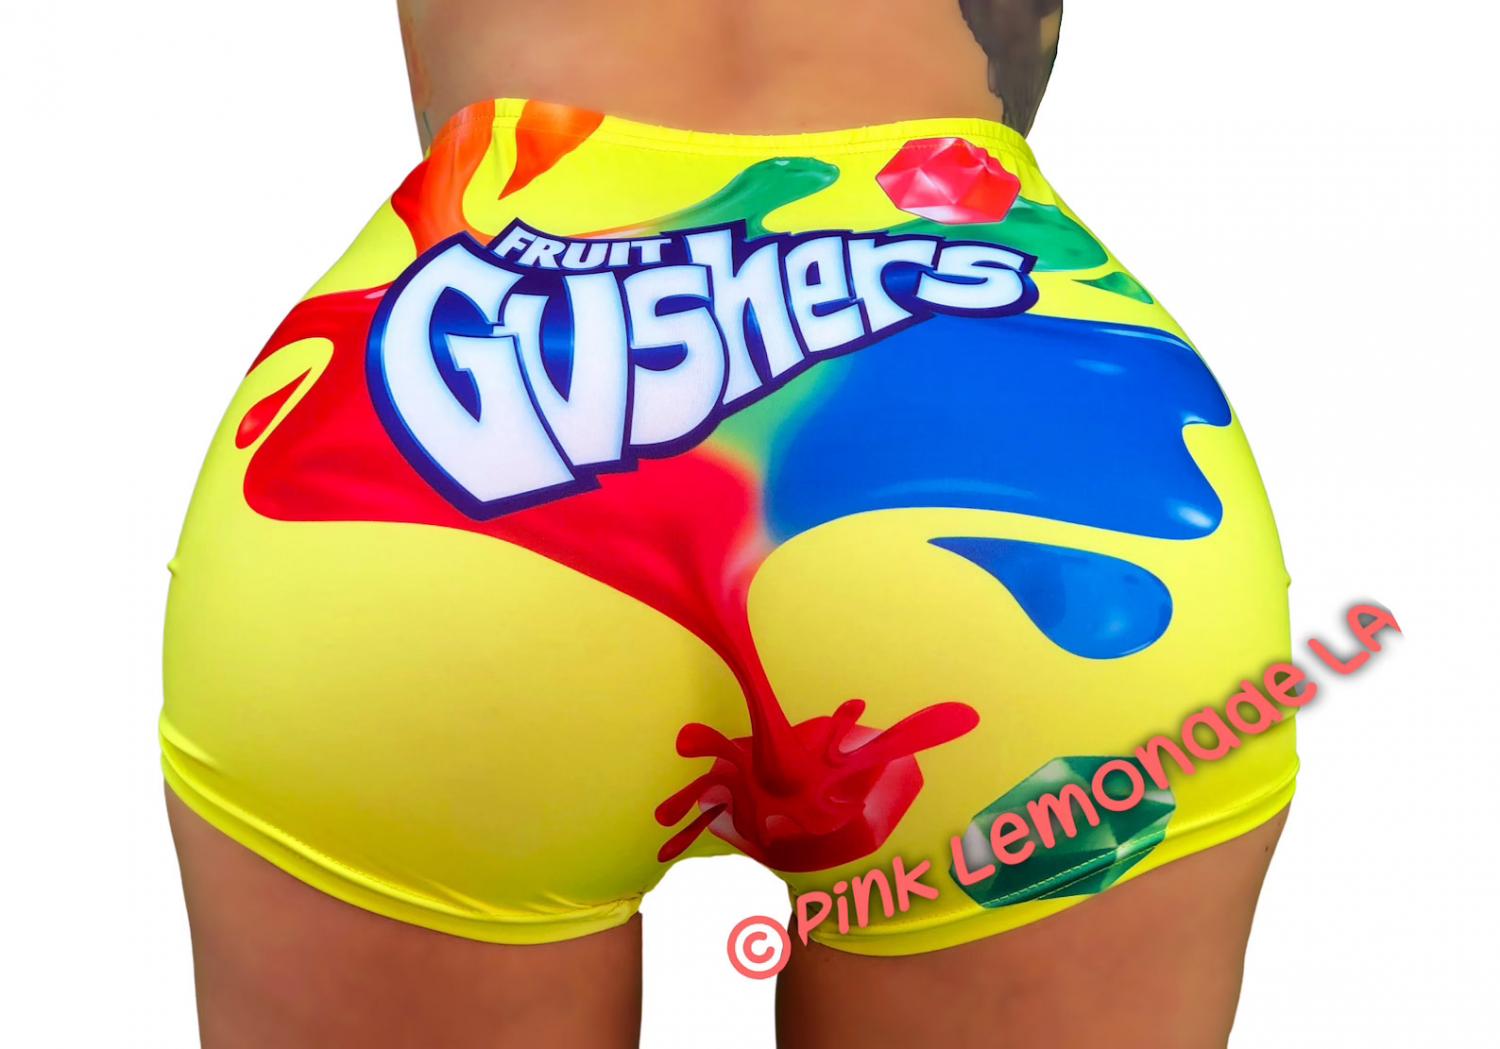 Snack Booty Shorts - Gushers Candy stretchy shorts